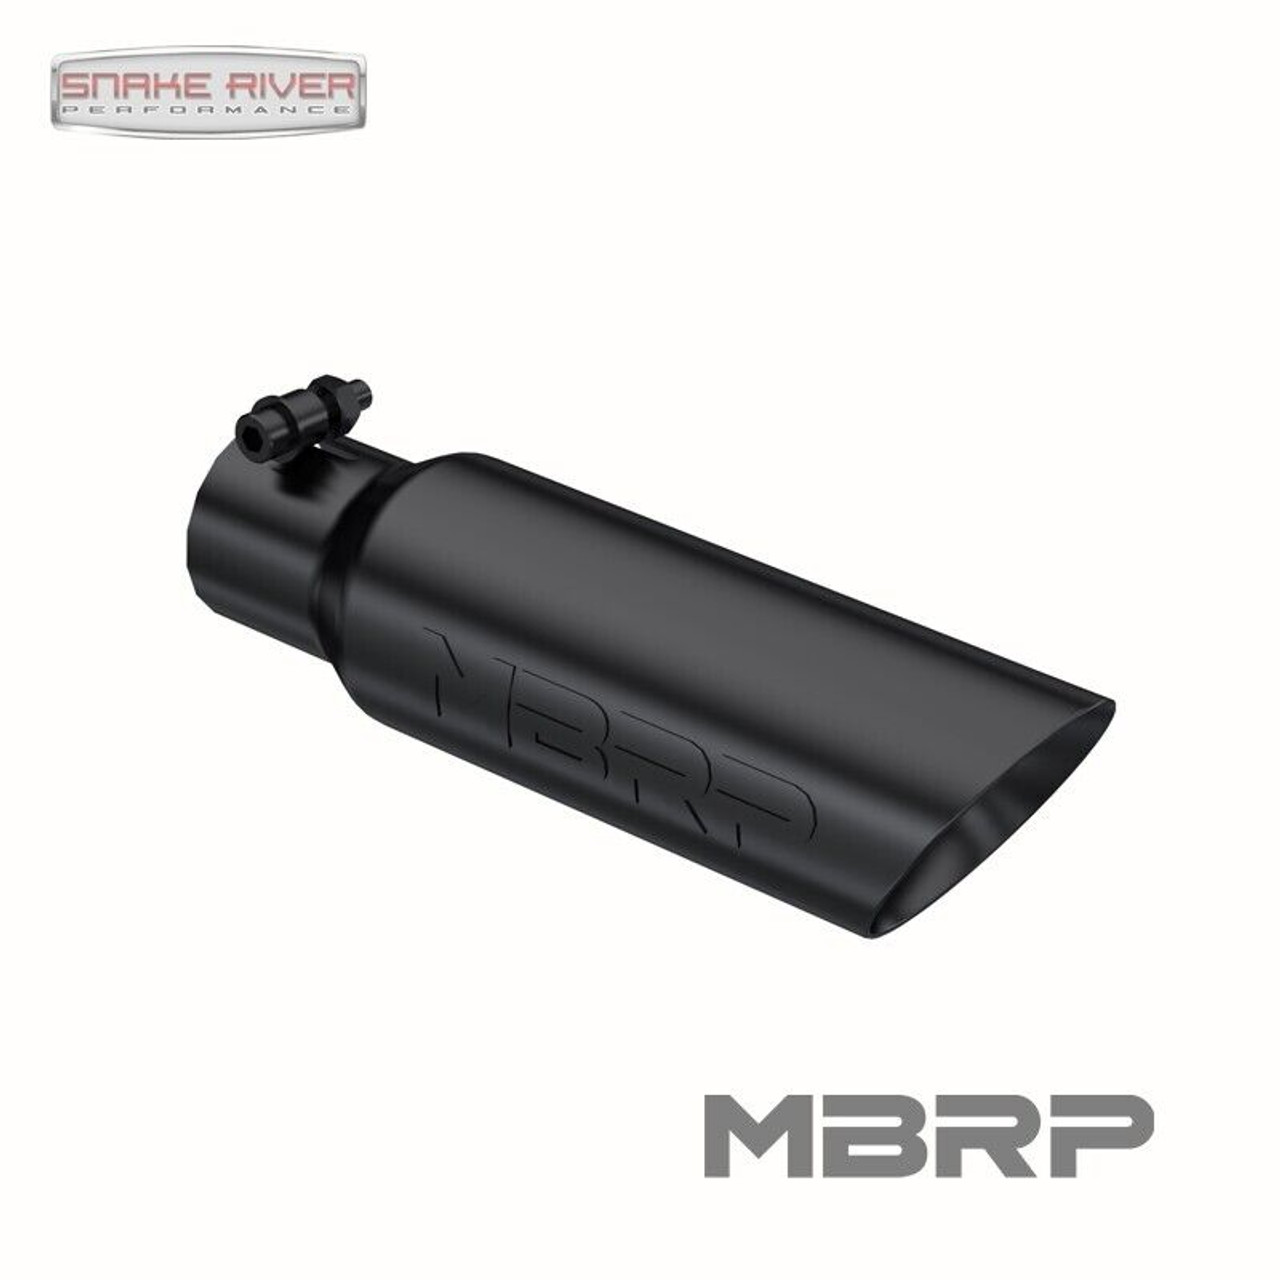 MBRP 12" STAINLESS STEEL EXHAUST TIP 2.5" IN 3.5" OUT DUAL WALL ANGLED T5106